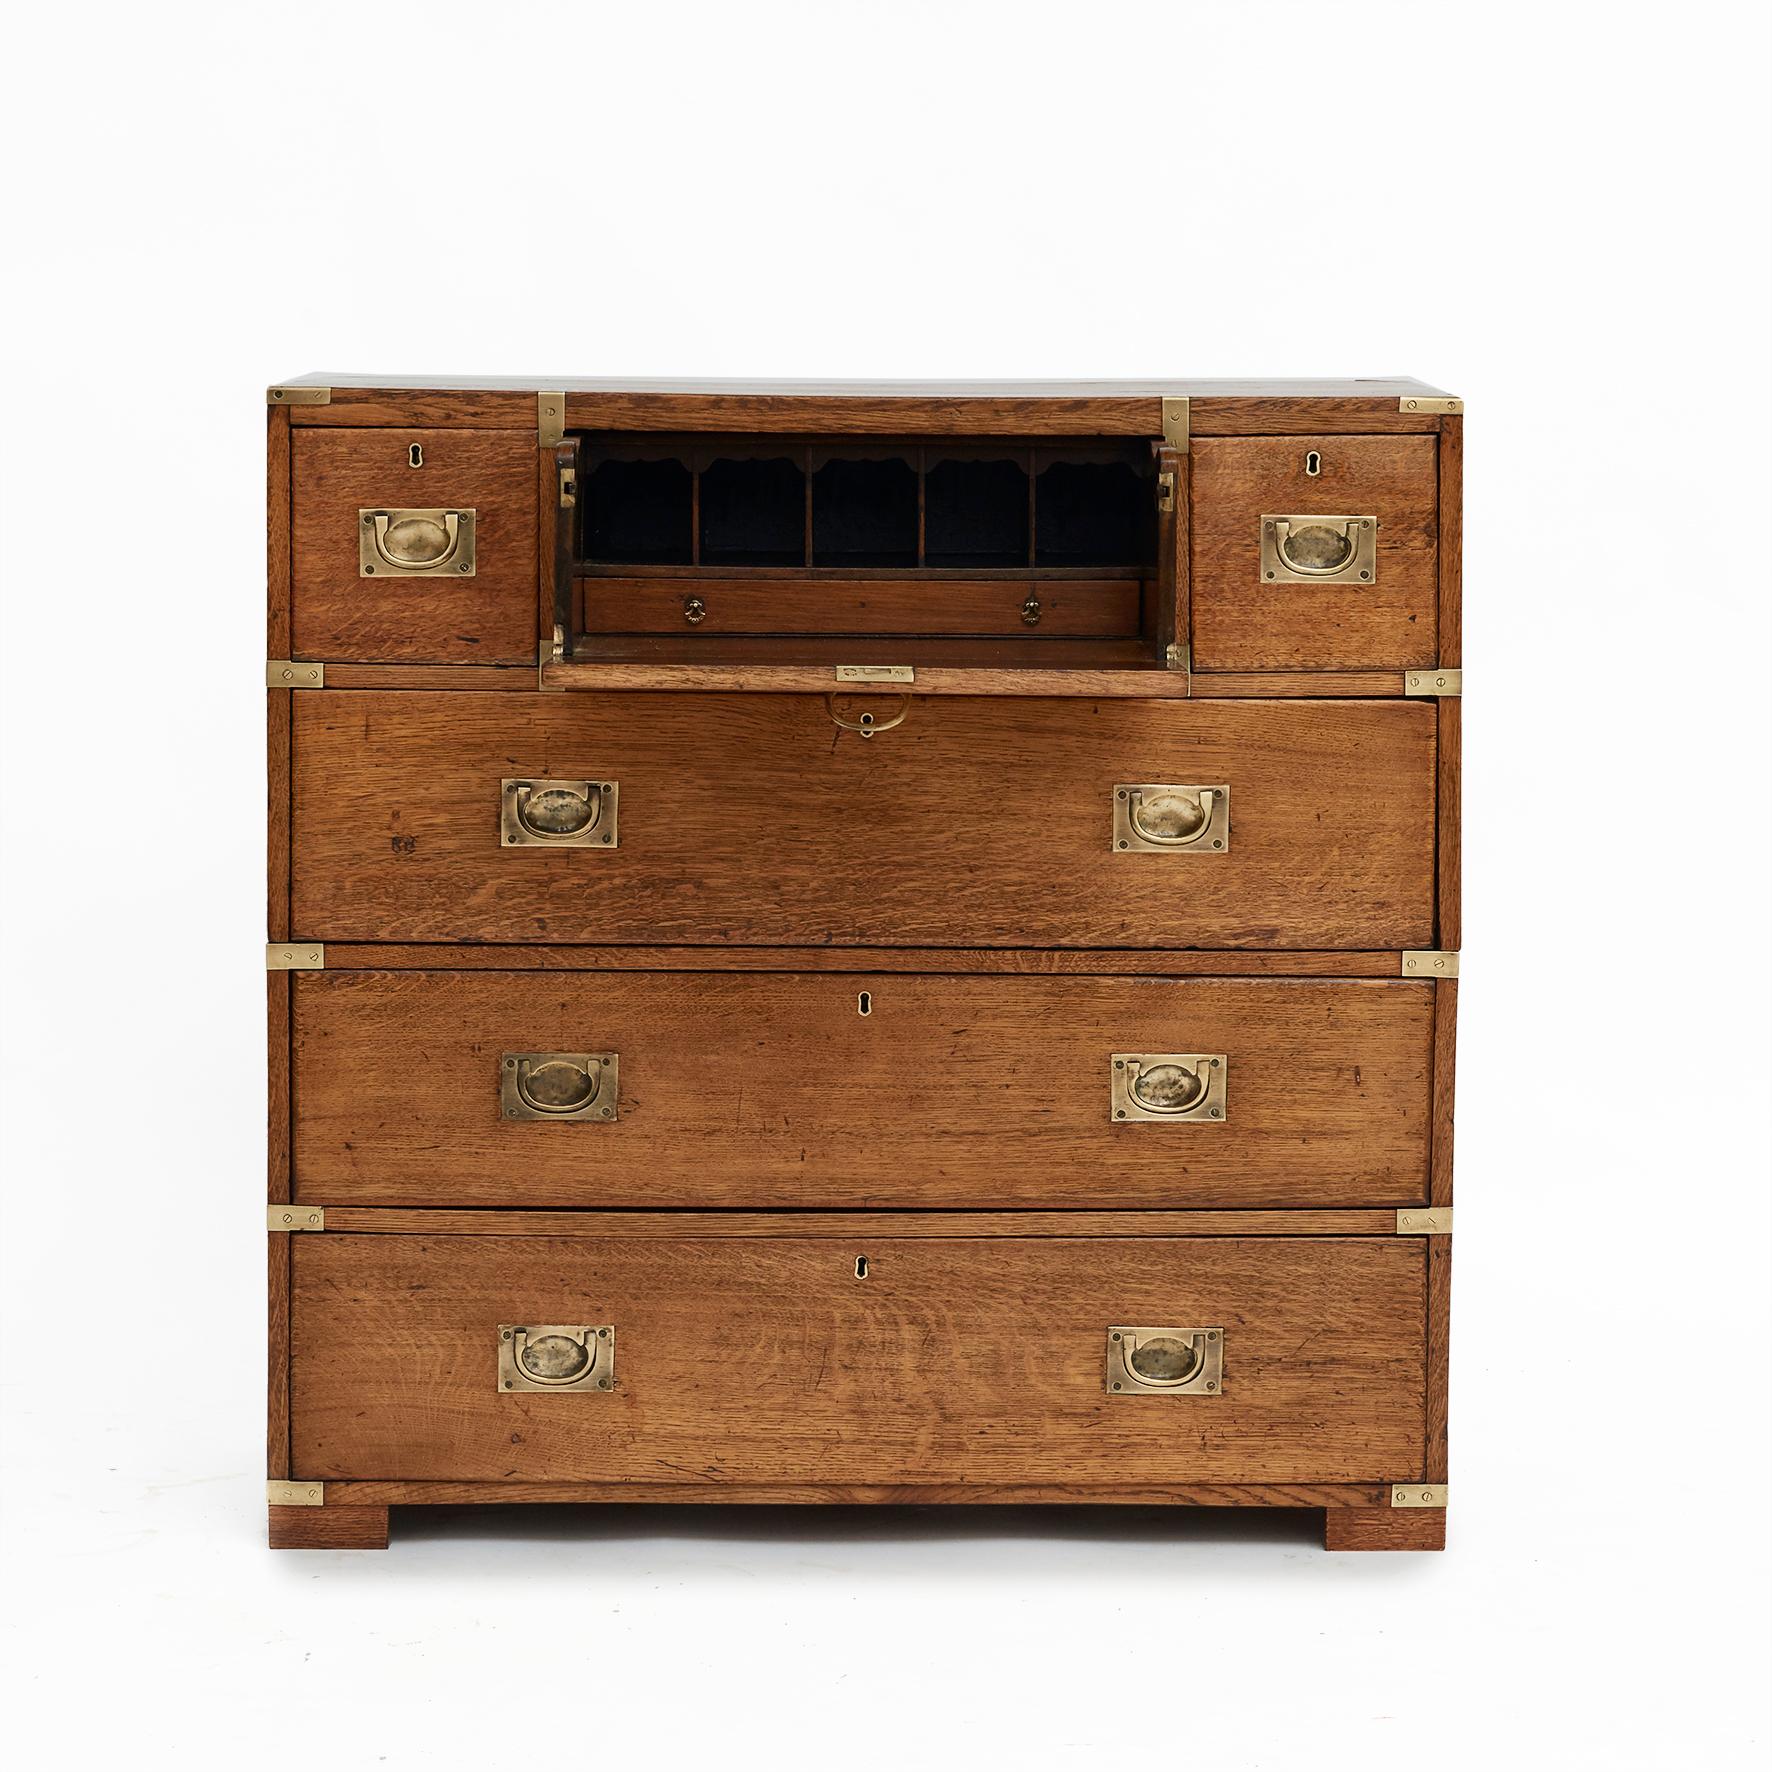 English military chest in 2 parts with writing decor.
Made in solid oak with original brass fittings.
The chest consisting of six drawers: Three smaller drawers at the top with the middle drawer opening up to a nice fitted interior with various